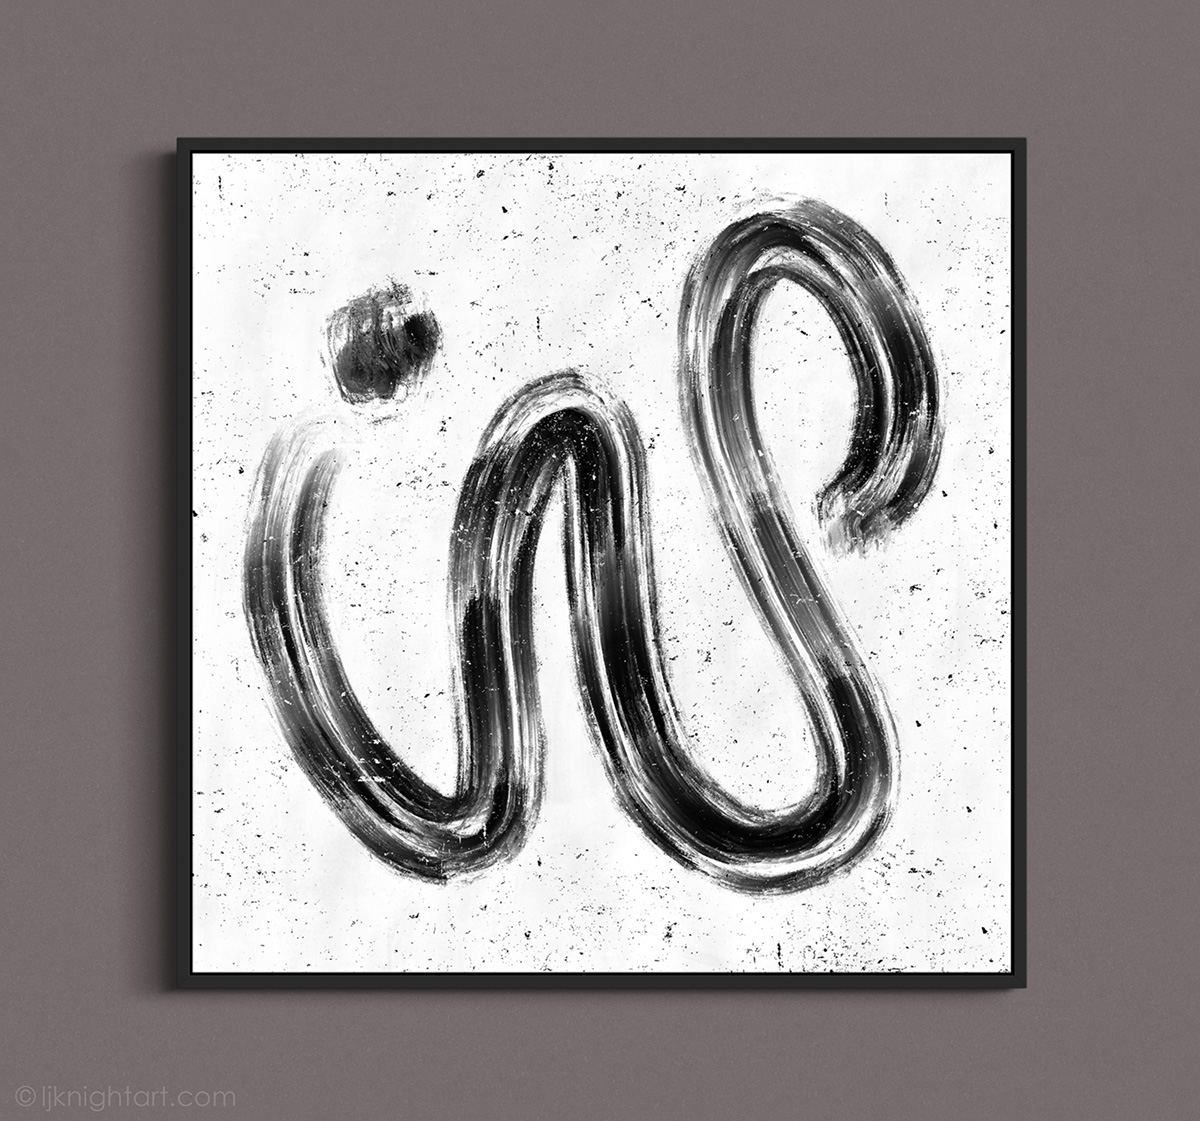 Bold Black Brush Stroke Monochrome Abstract Painting - modern digital painting featuring  bold curved brush strokes on a light textured background, by L.J. Knight